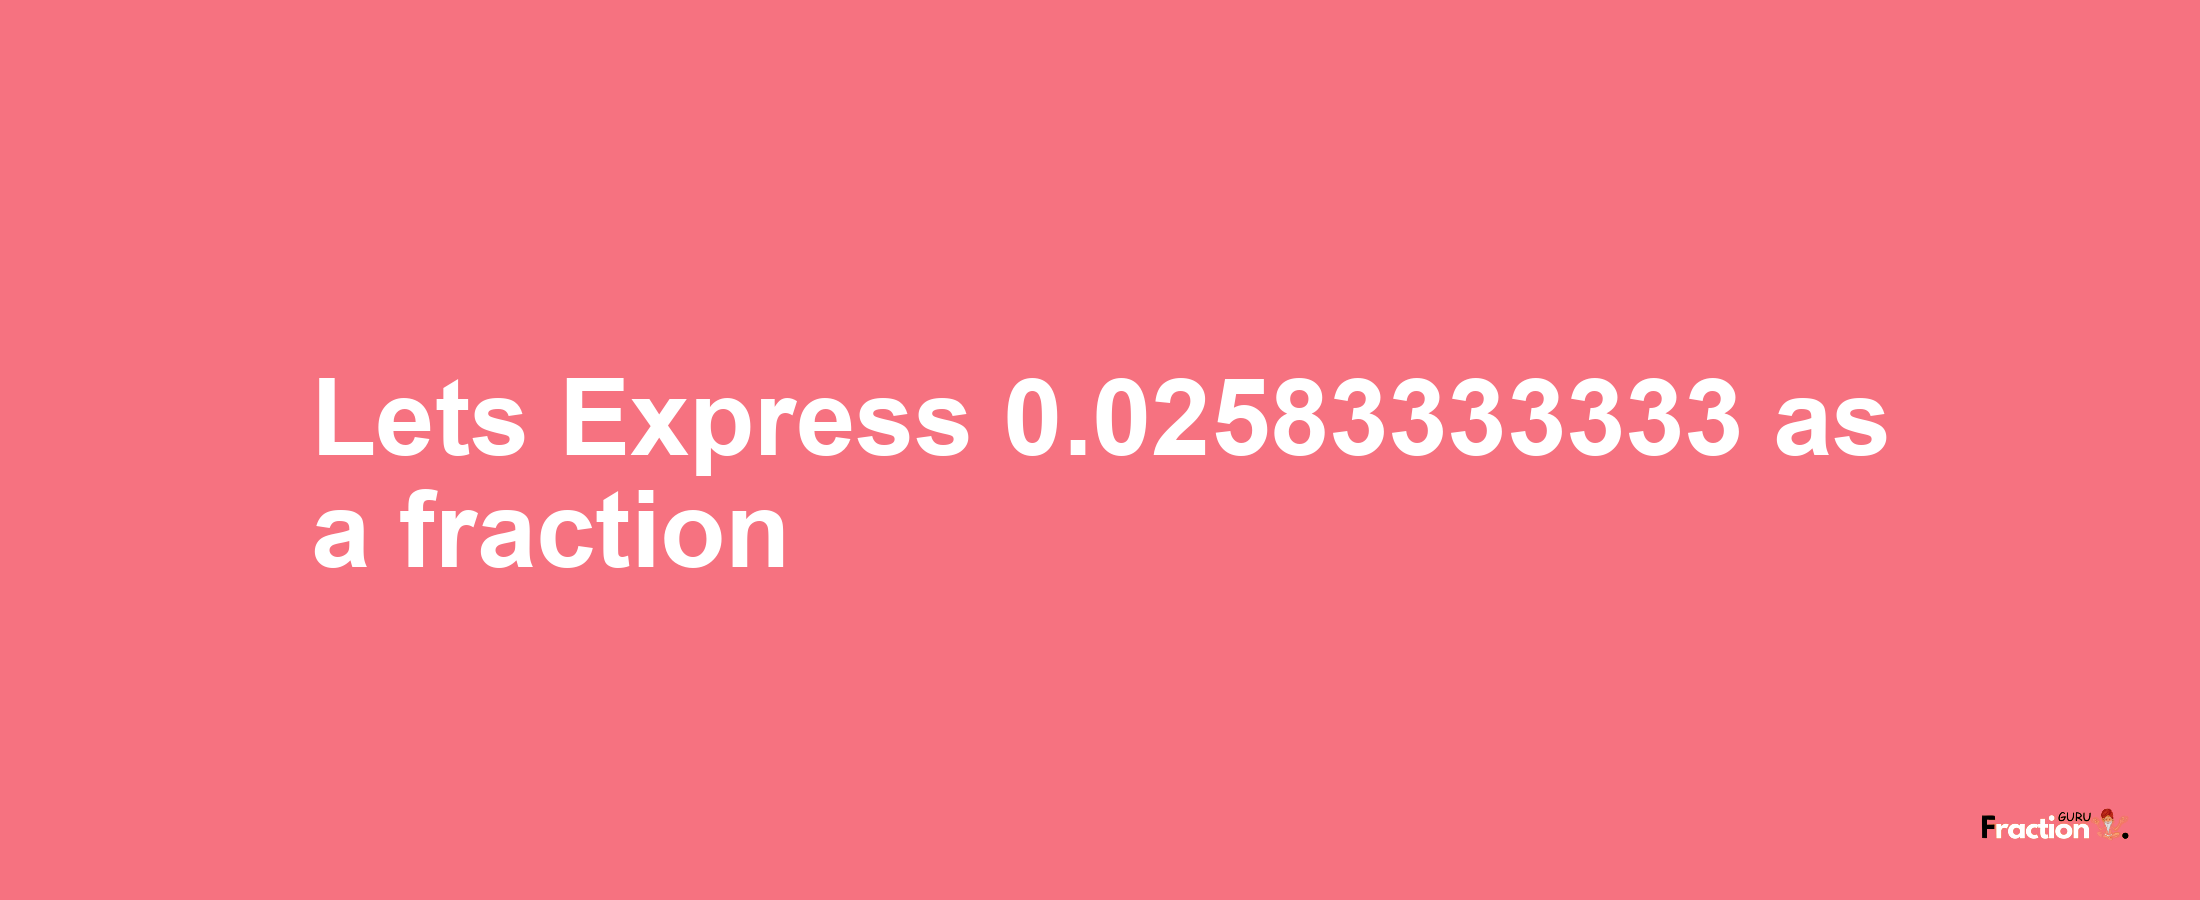 Lets Express 0.02583333333 as afraction